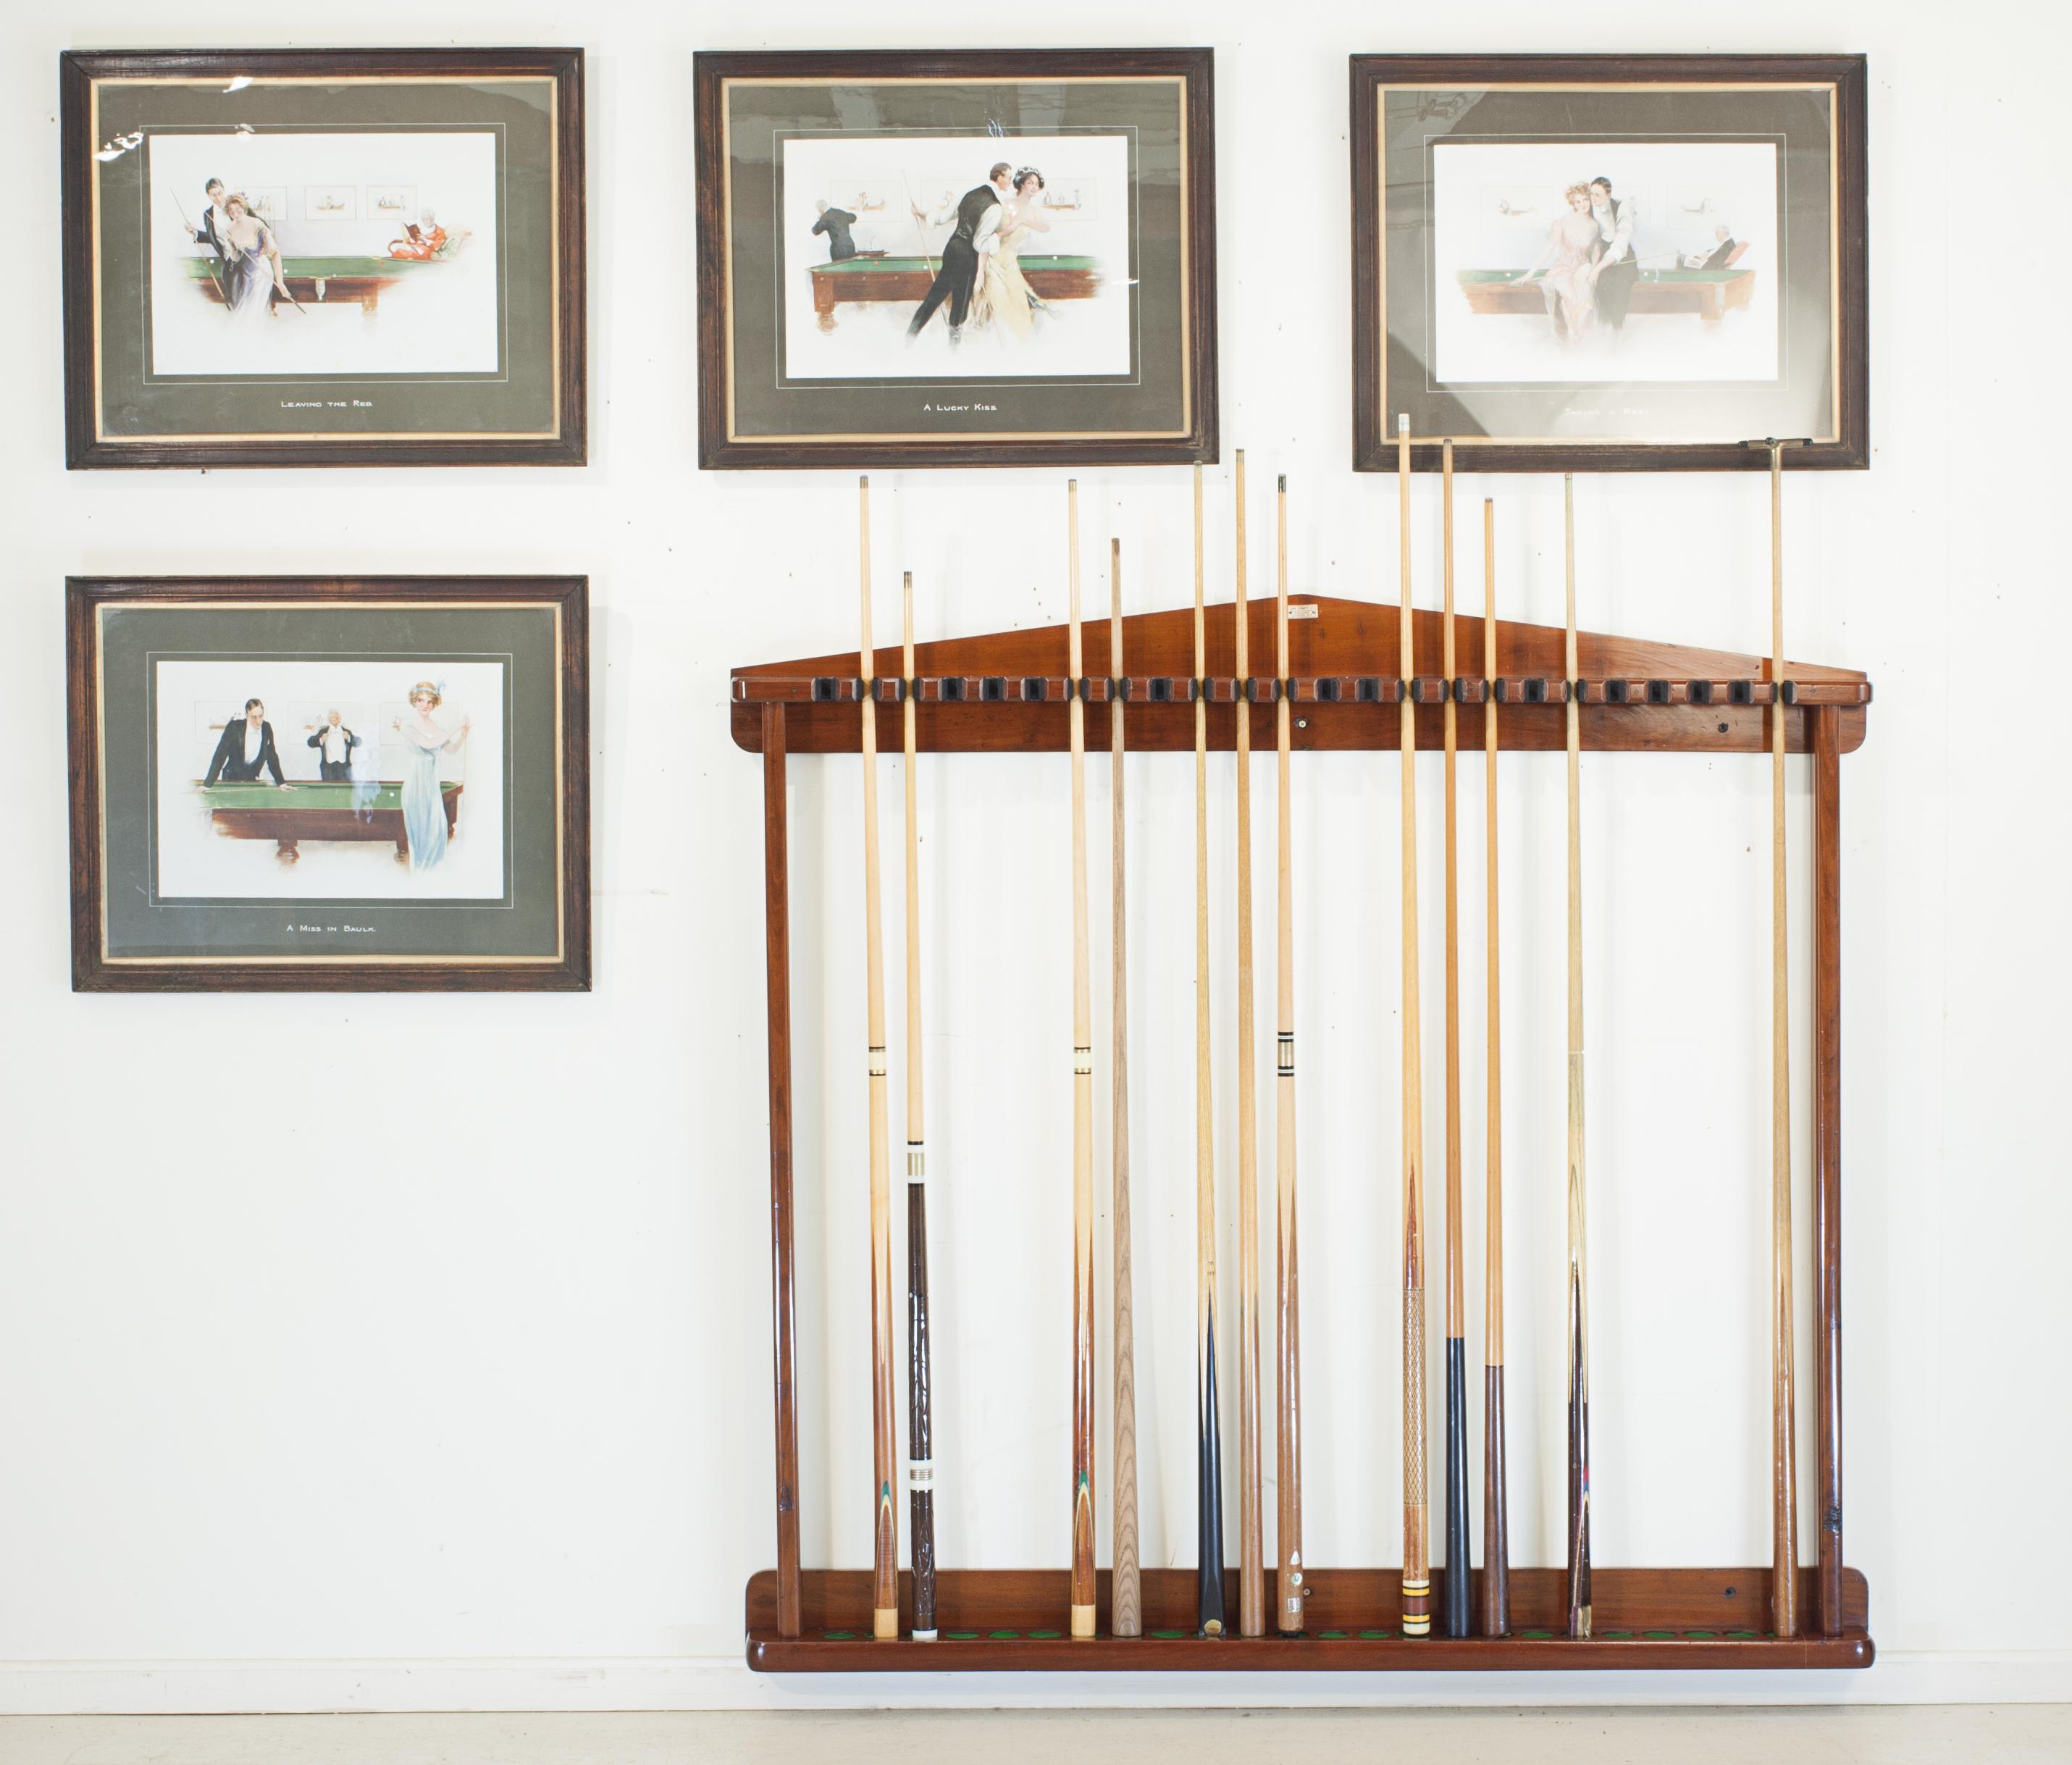 Wall mounted cue rack.
A large wall mounted antique billiards, snooker, or pool cue rack constructed from mahogany. The rack will hold twenty four cues and rest and clip in the slots at the top. The slots have been fitted with foam to keep the cues